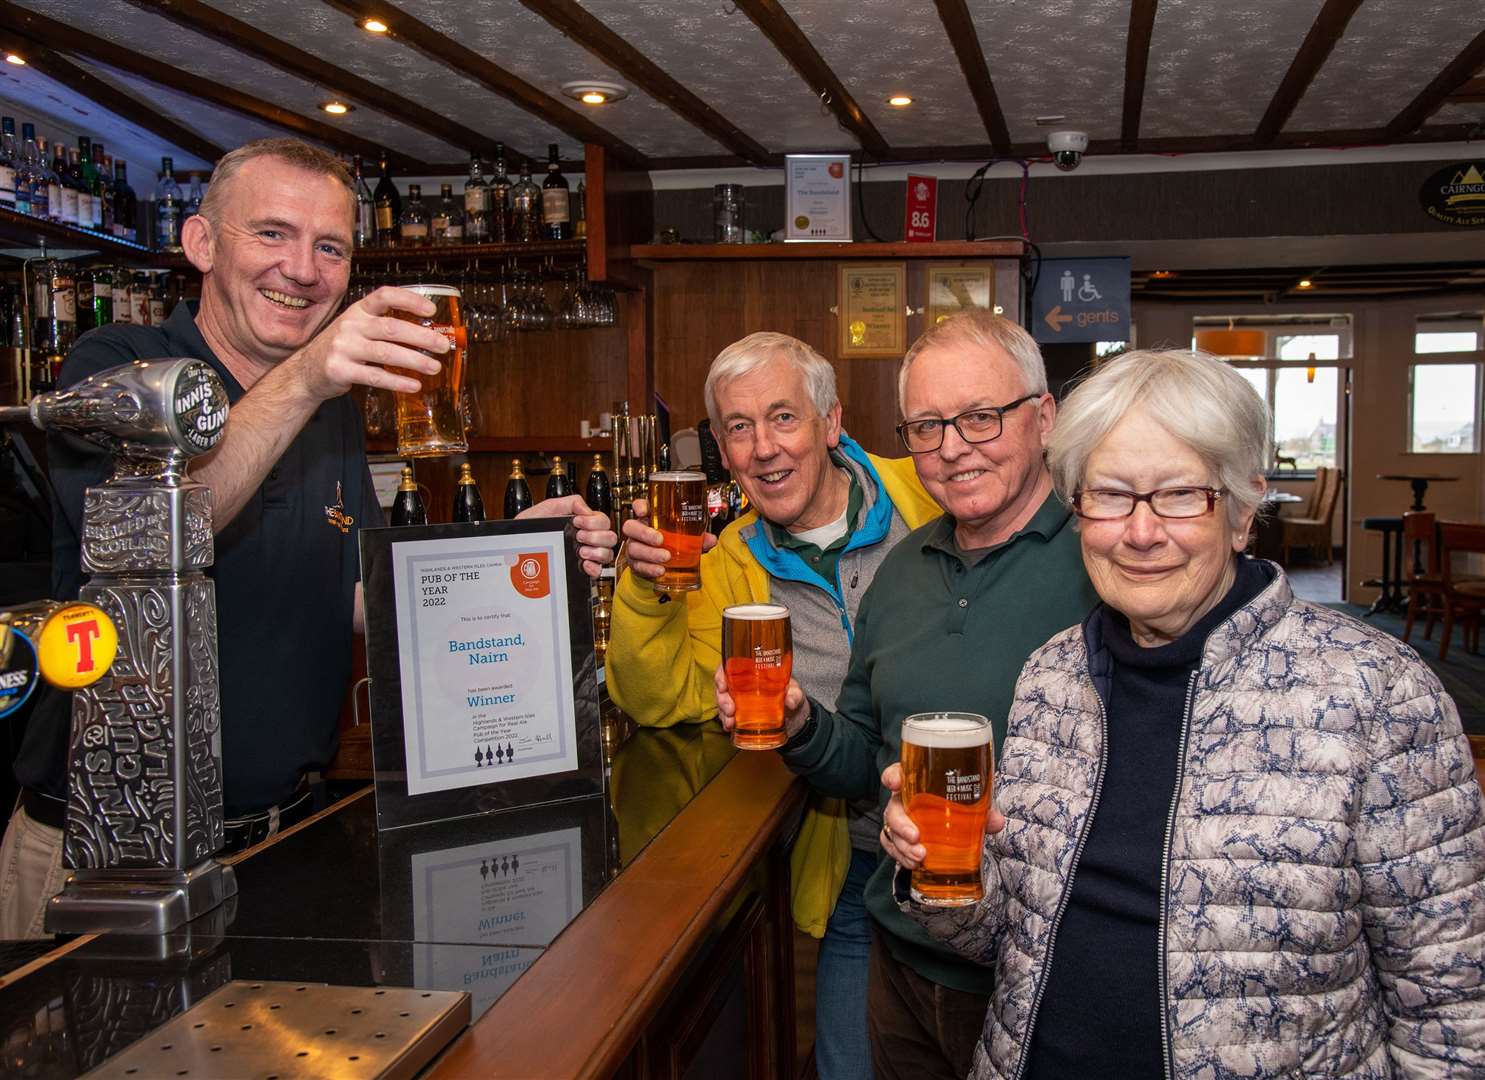 From Left: Paul Geddes, CAMRA Highalnds and Islands Chairman Jim Hall and loyal customers Andrew Gardener and Elizabeth Bligh.